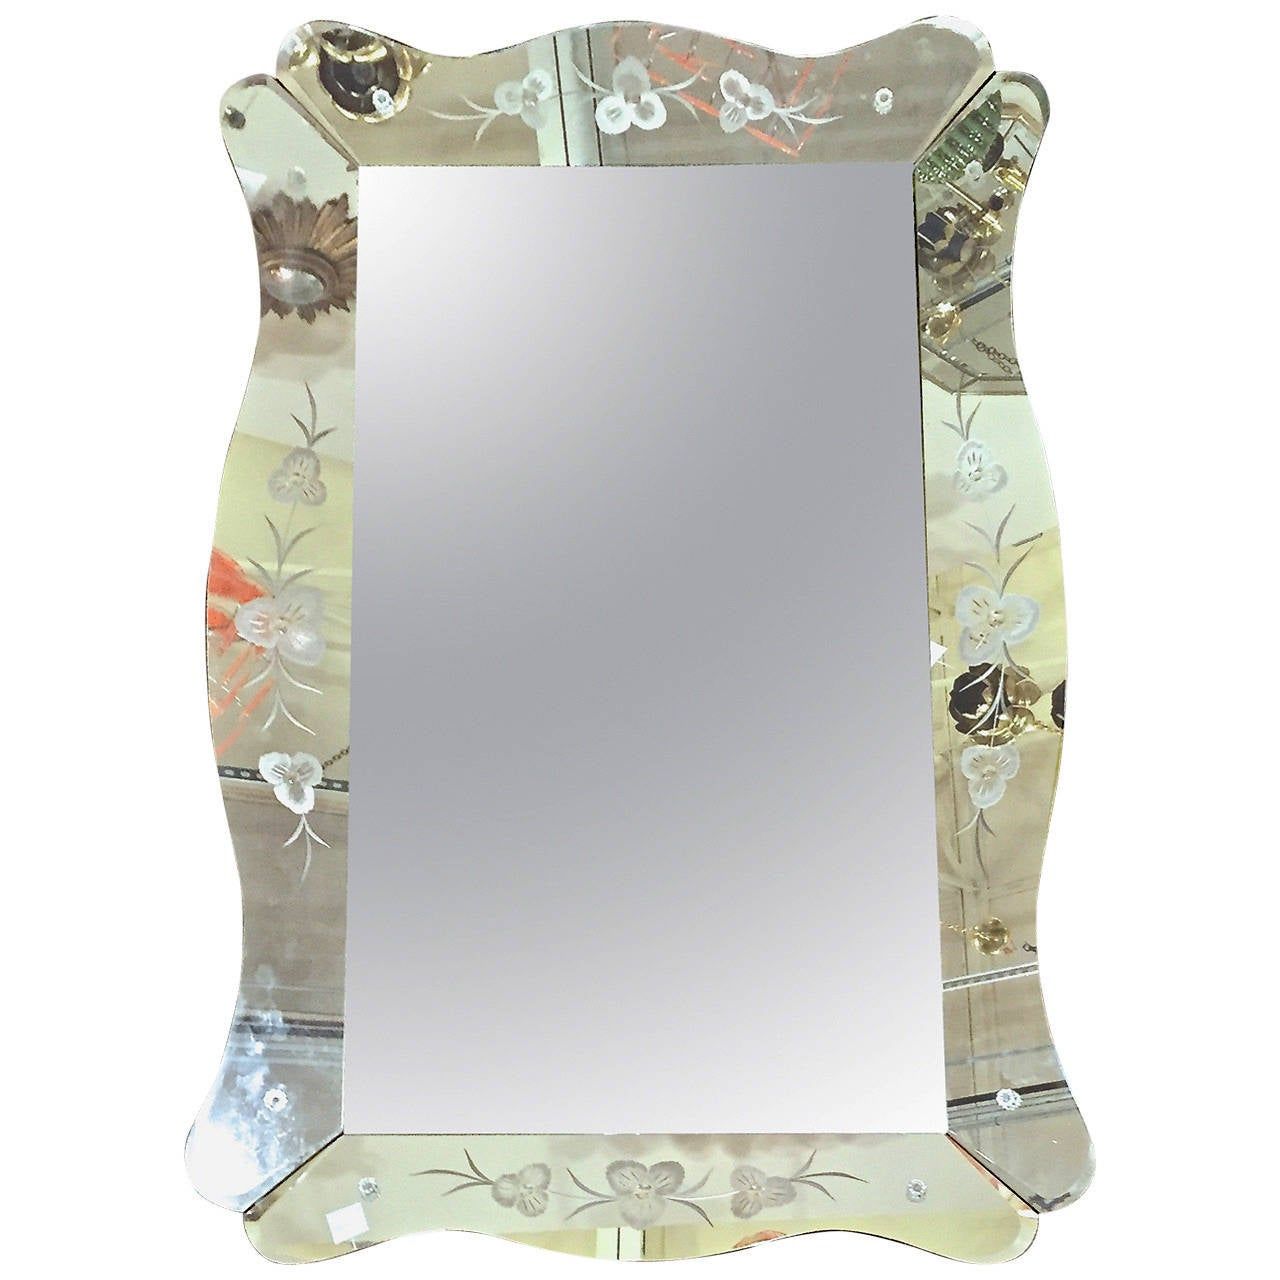 Large Art Deco Etched Curved Edge Wall Mirror At 1stdibs Within Rounded Cut Edge Wall Mirrors (View 14 of 15)